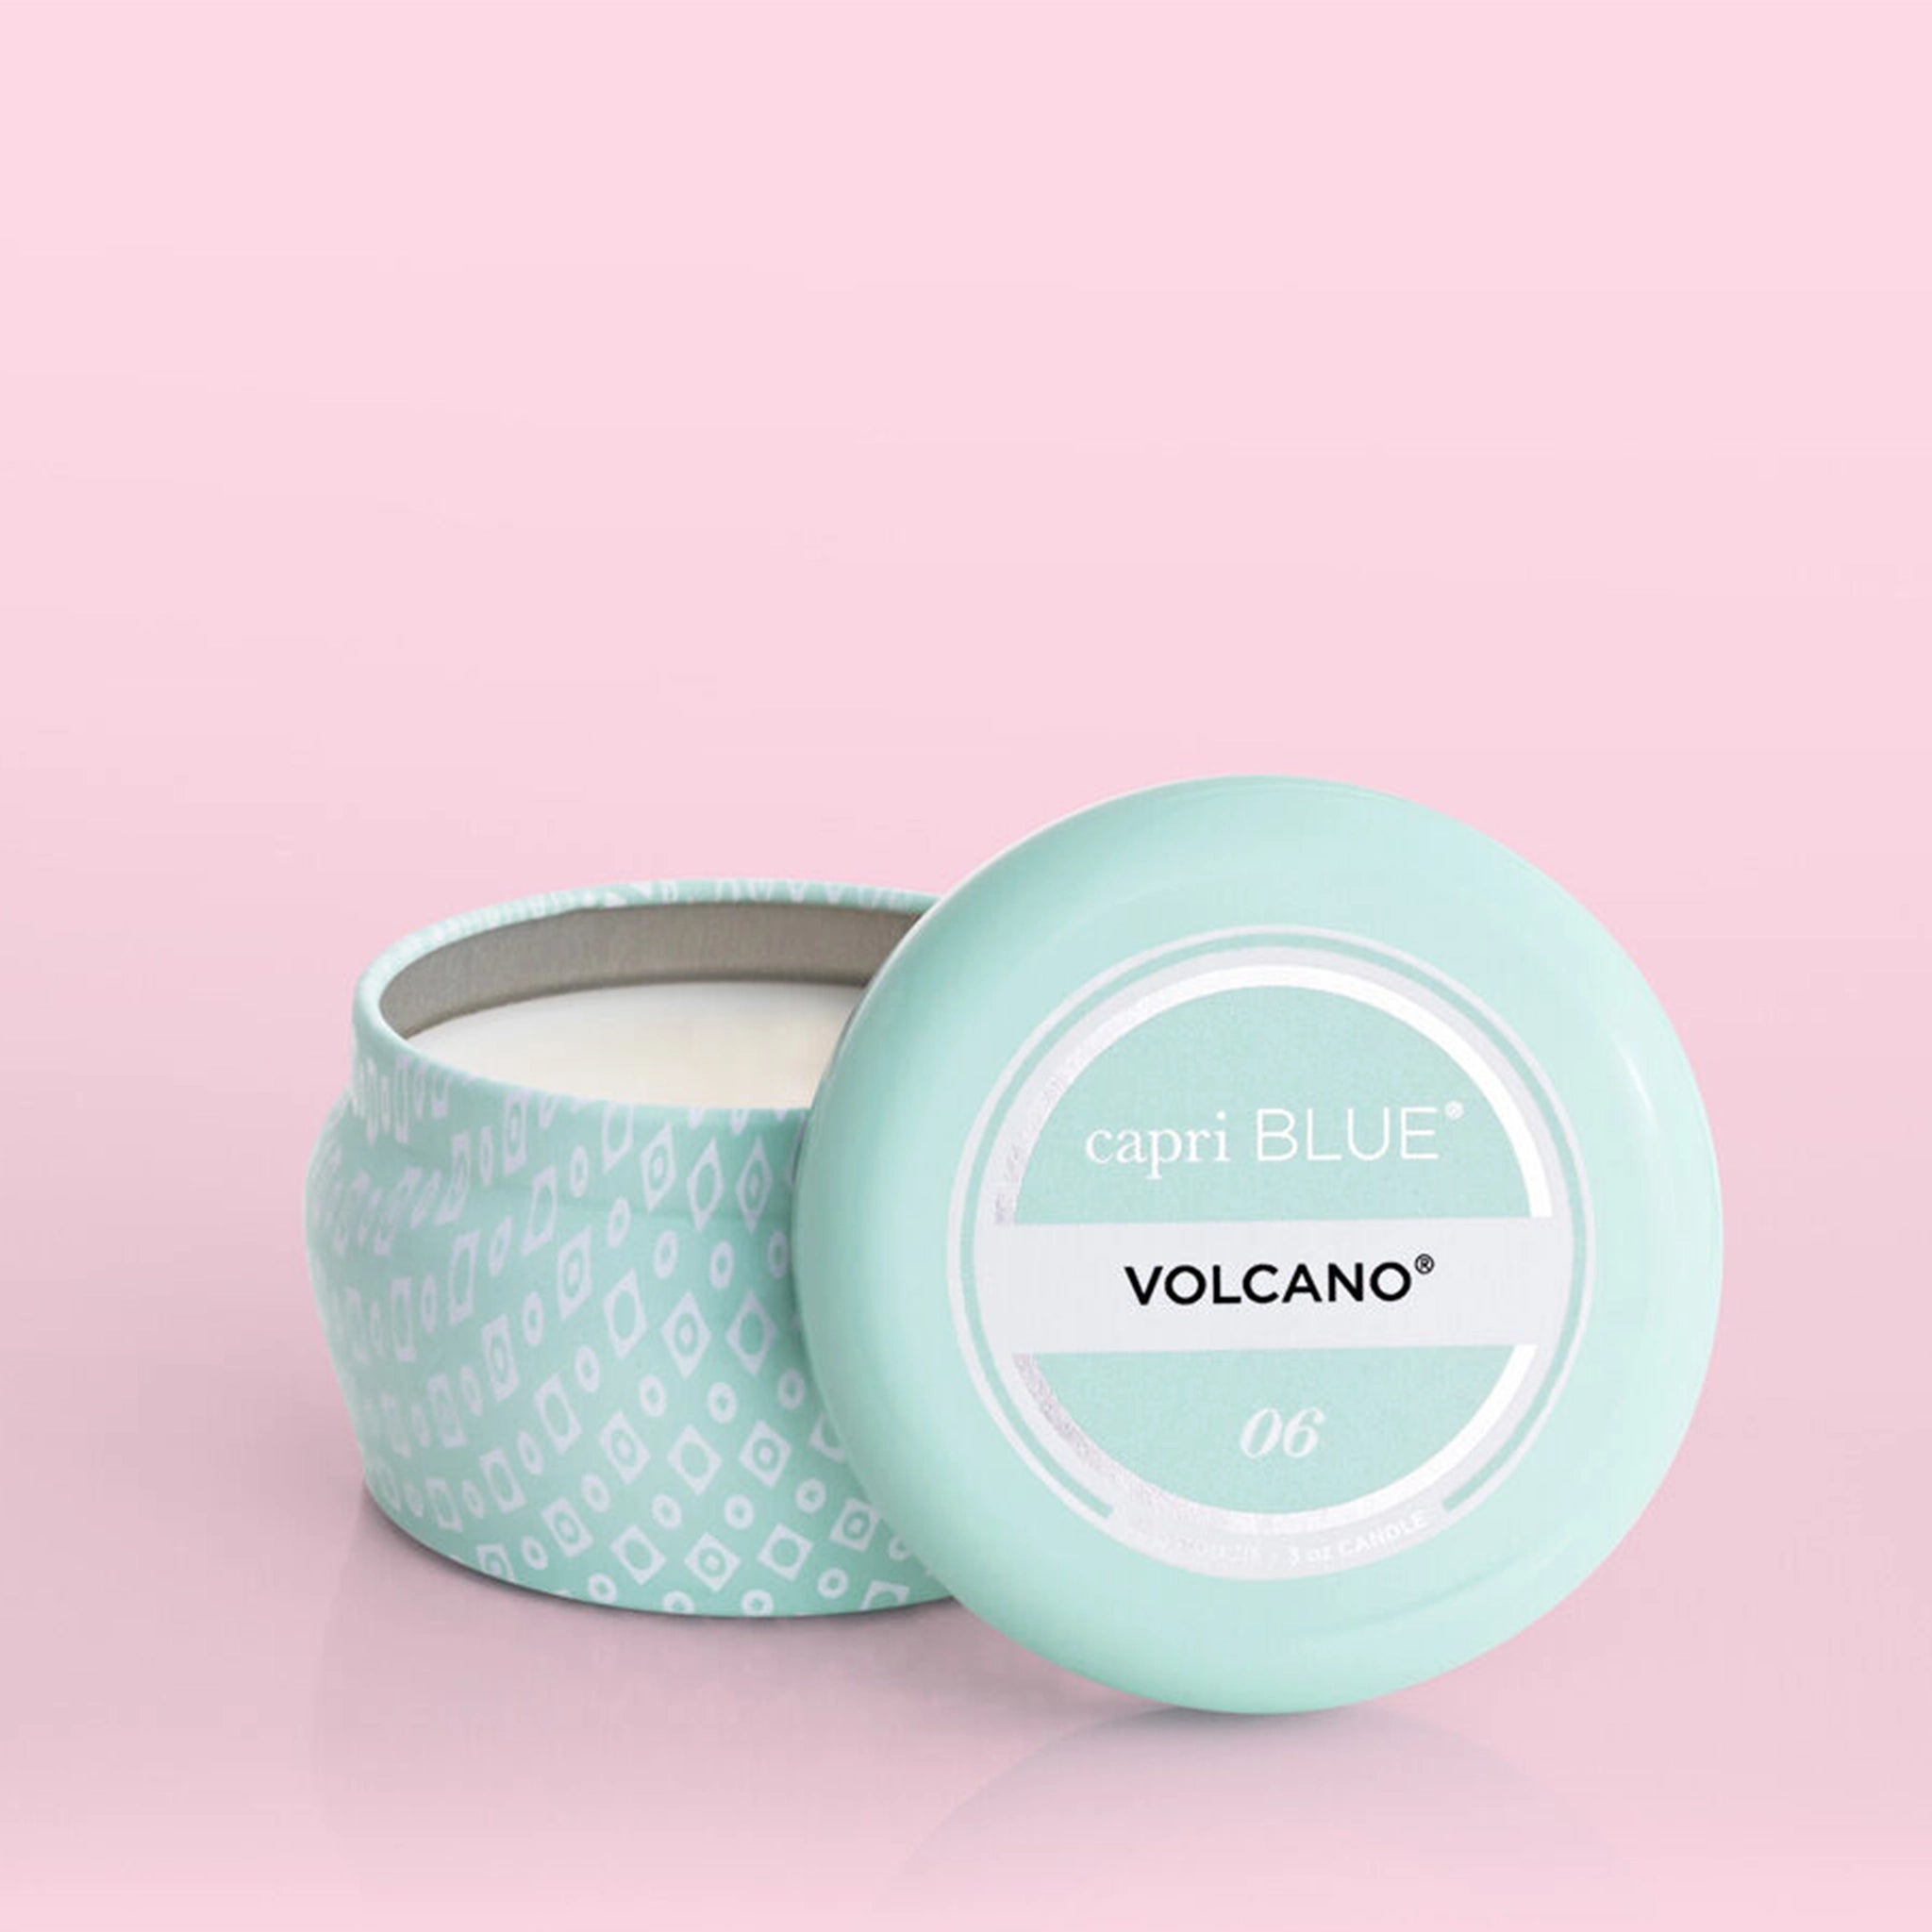 A small blue tin candle with white wax and a white diamond repeating pattern on the outside of the tin. Comes with a matching blue lid that reads, "Capri Blue Volcano".